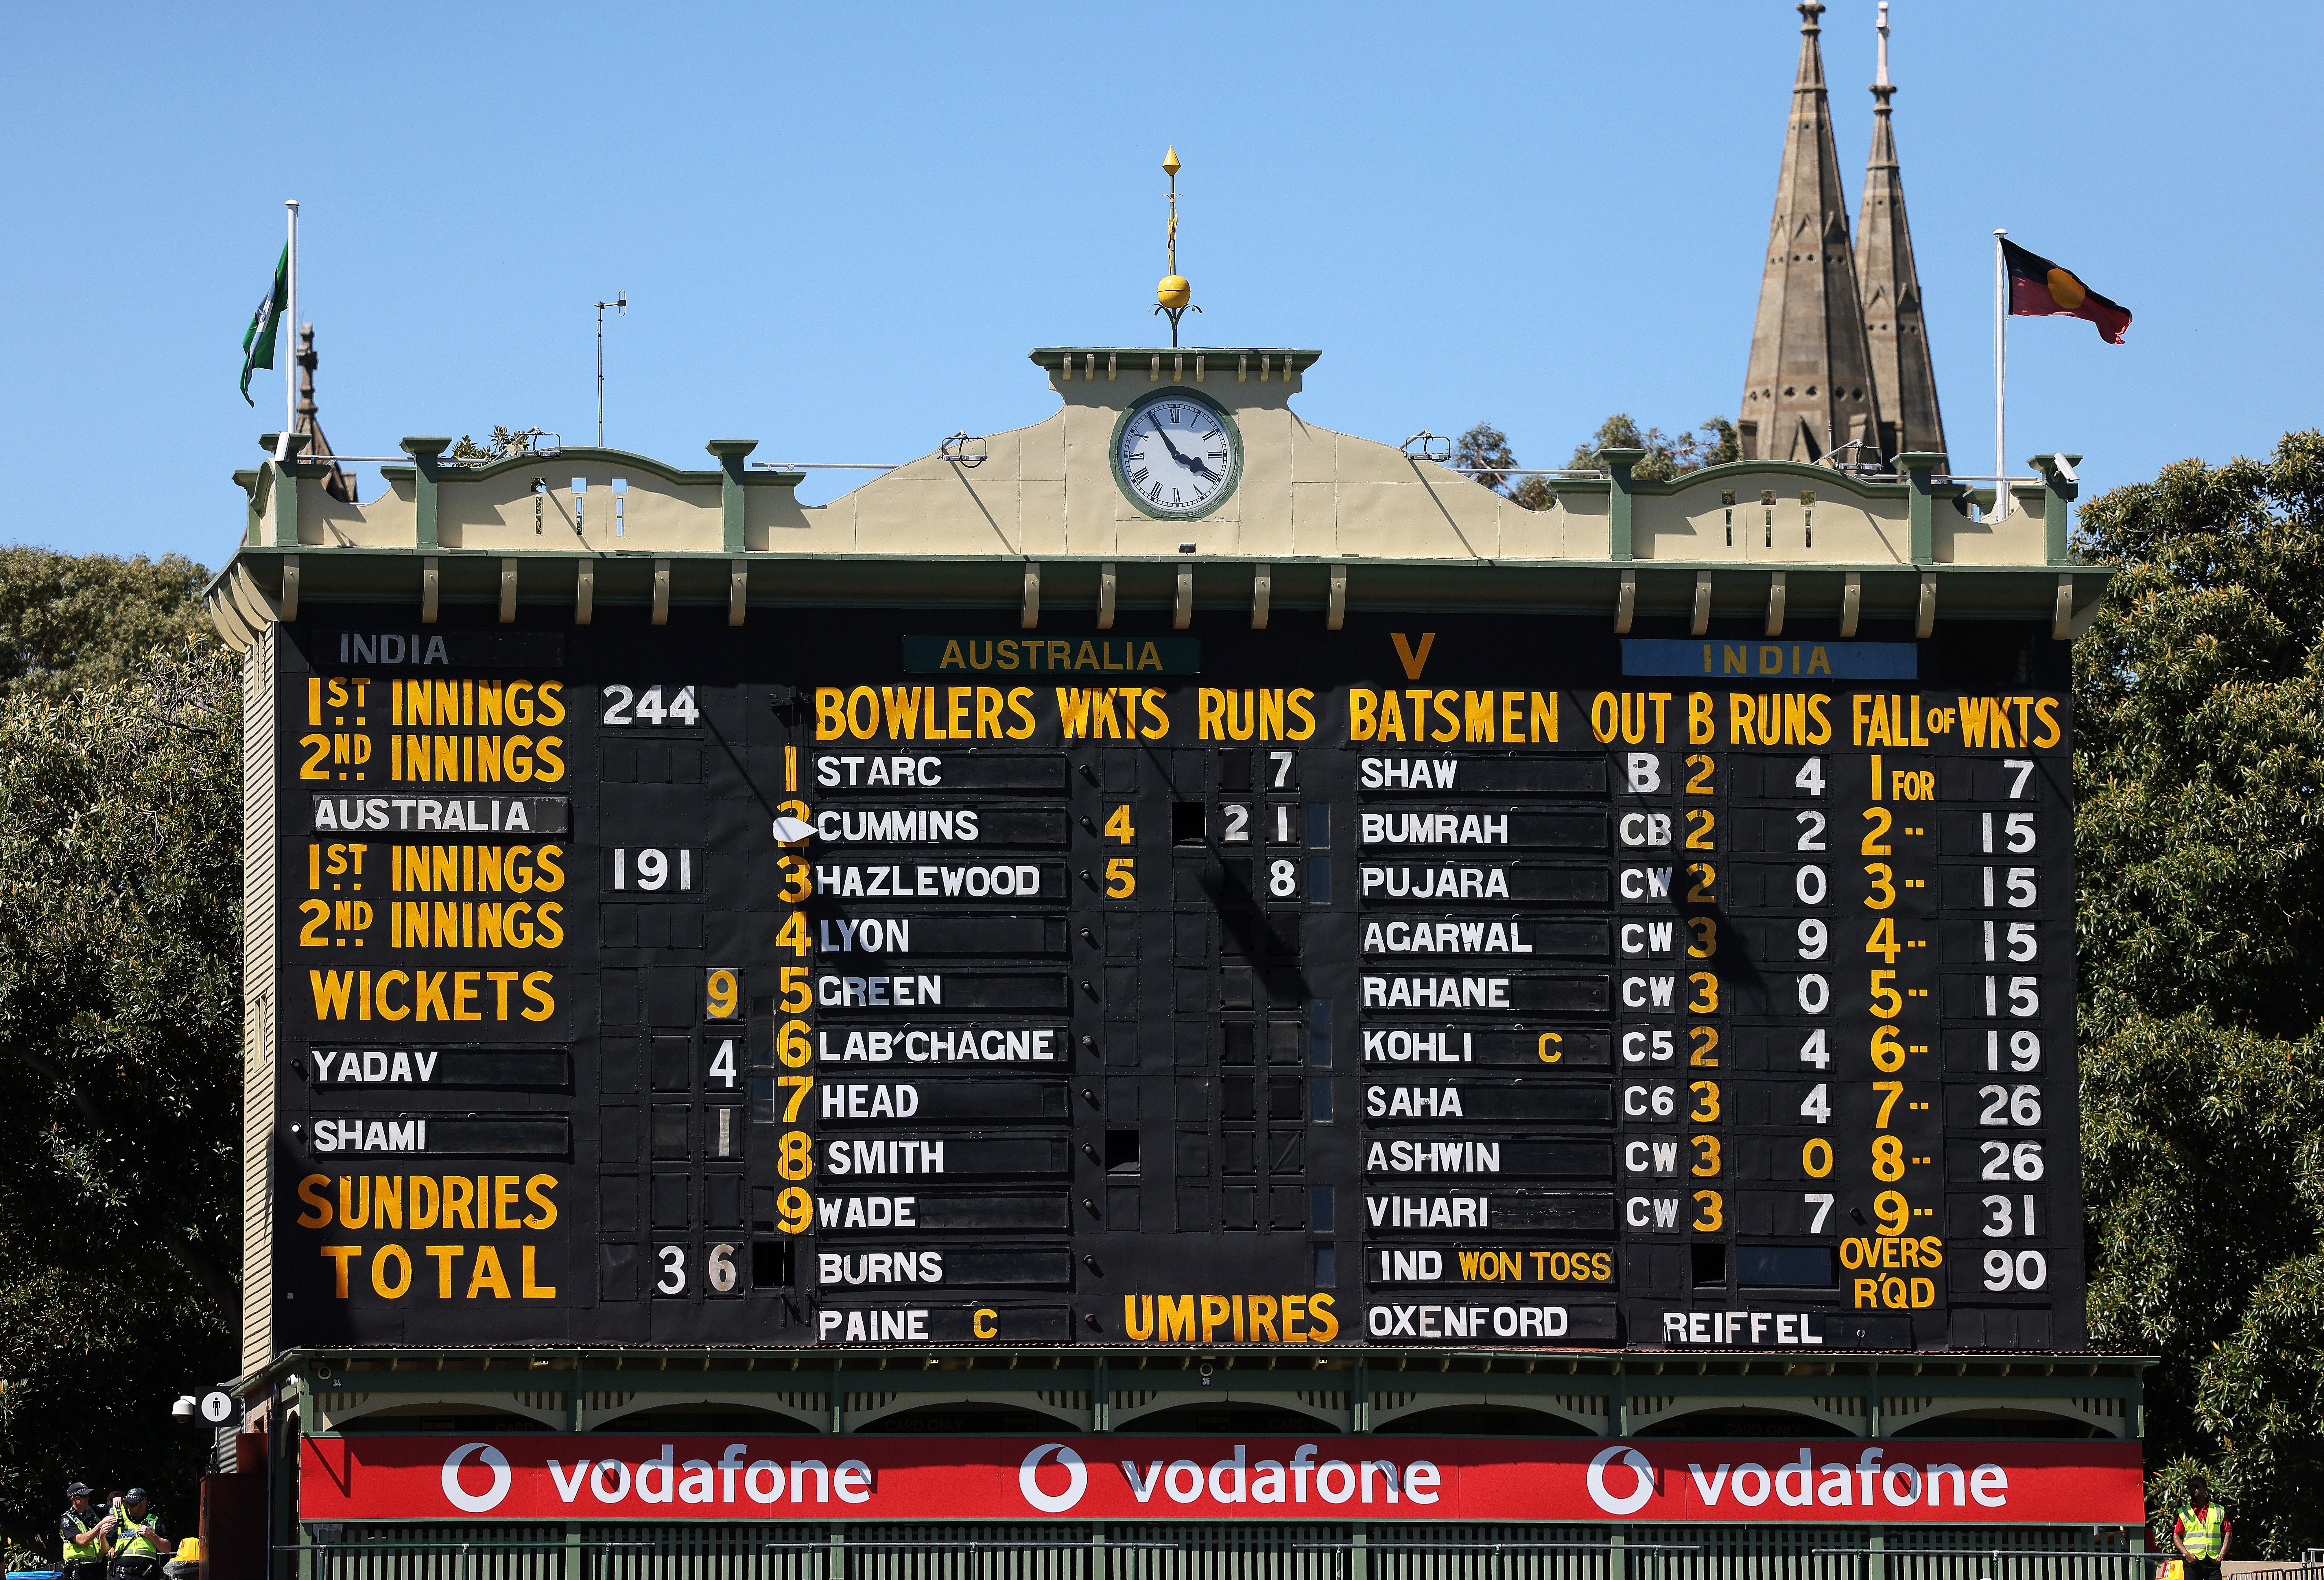 The old scoreboard at the end of the Indian second innings.